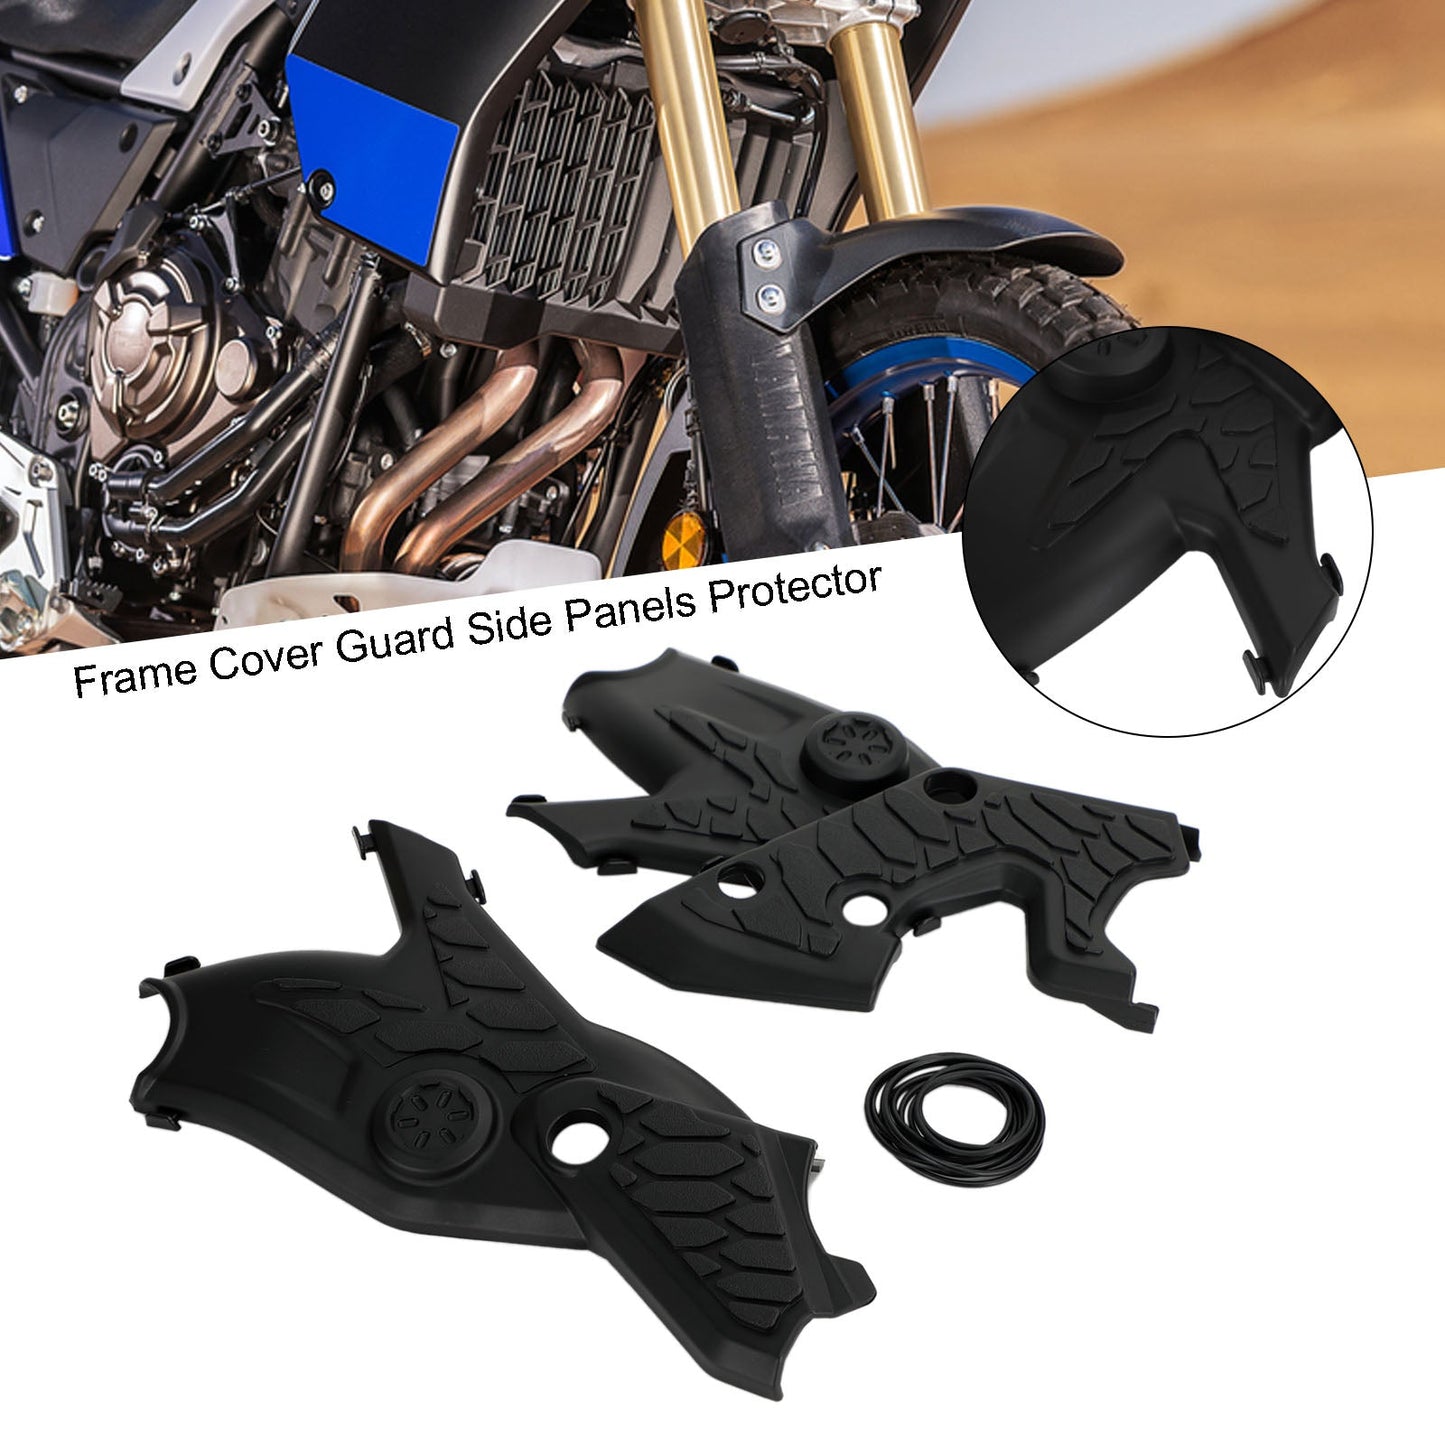 Frame Cover Guard Side Panels Protector For Yamaha Tenere 700 2019-2021